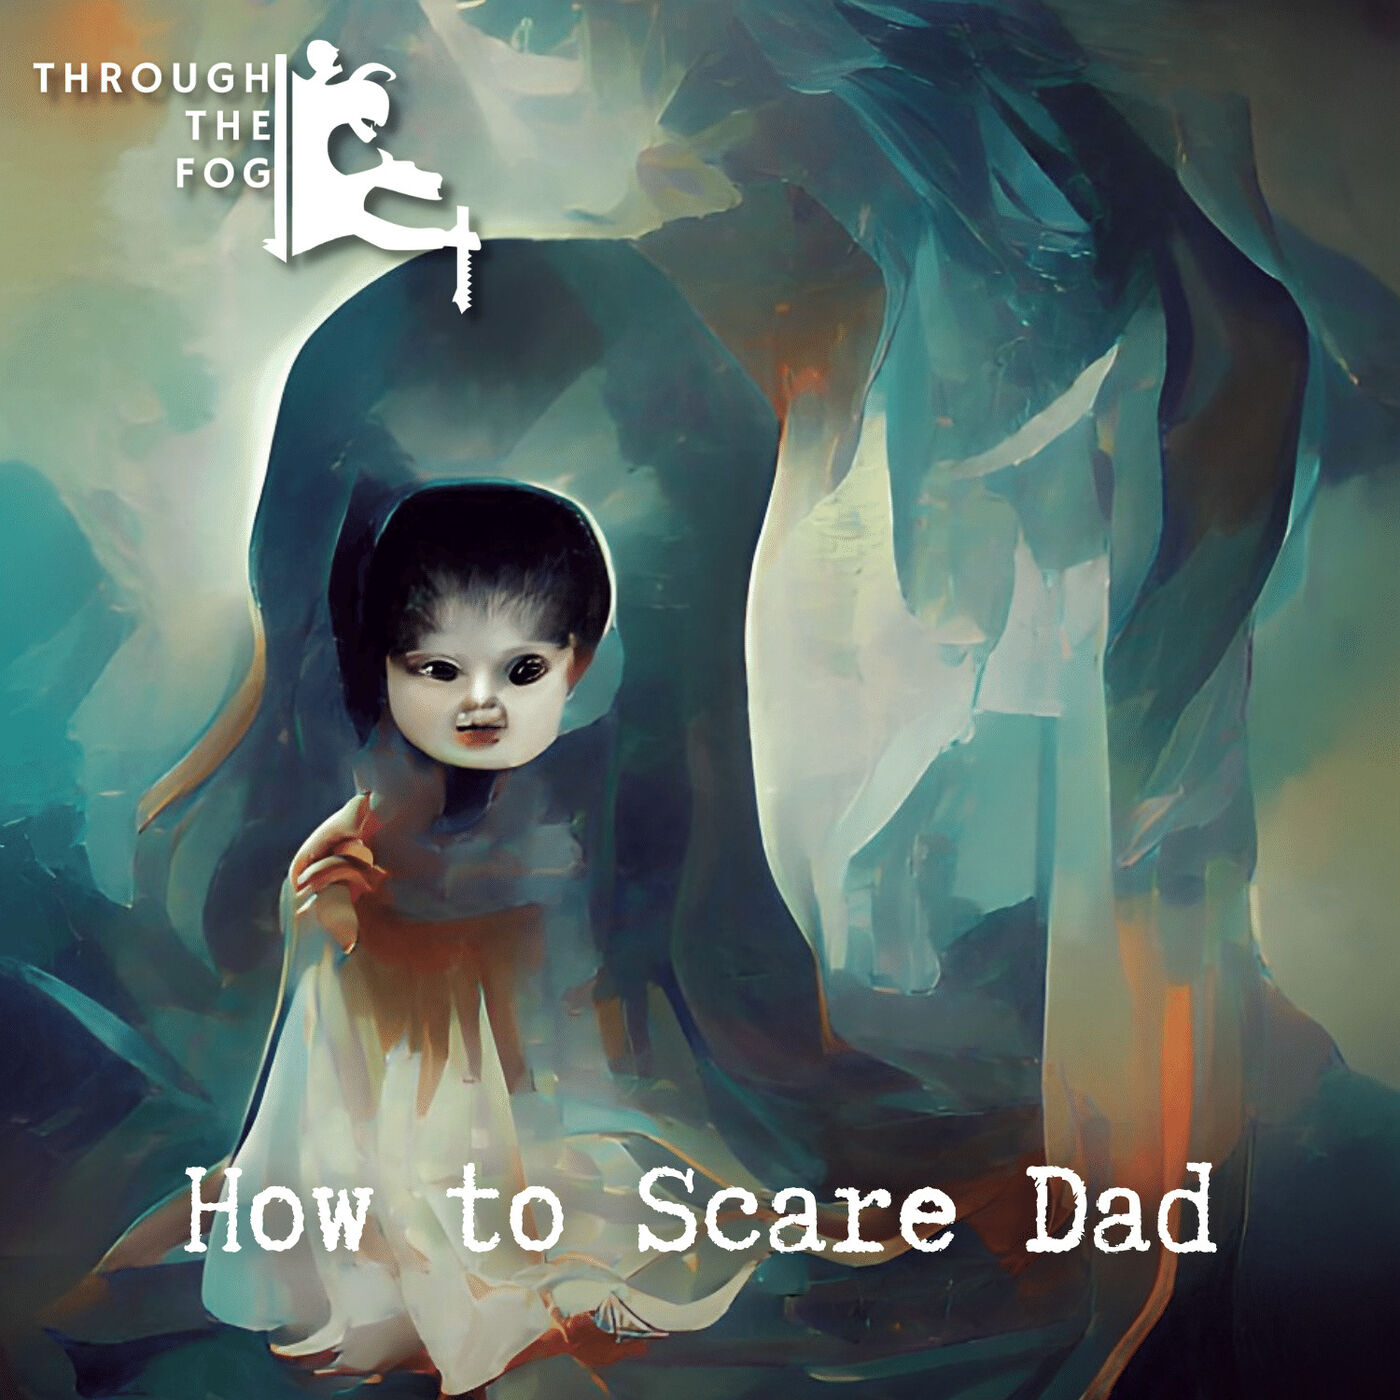 How To Scare Dad (Trigger Warning)